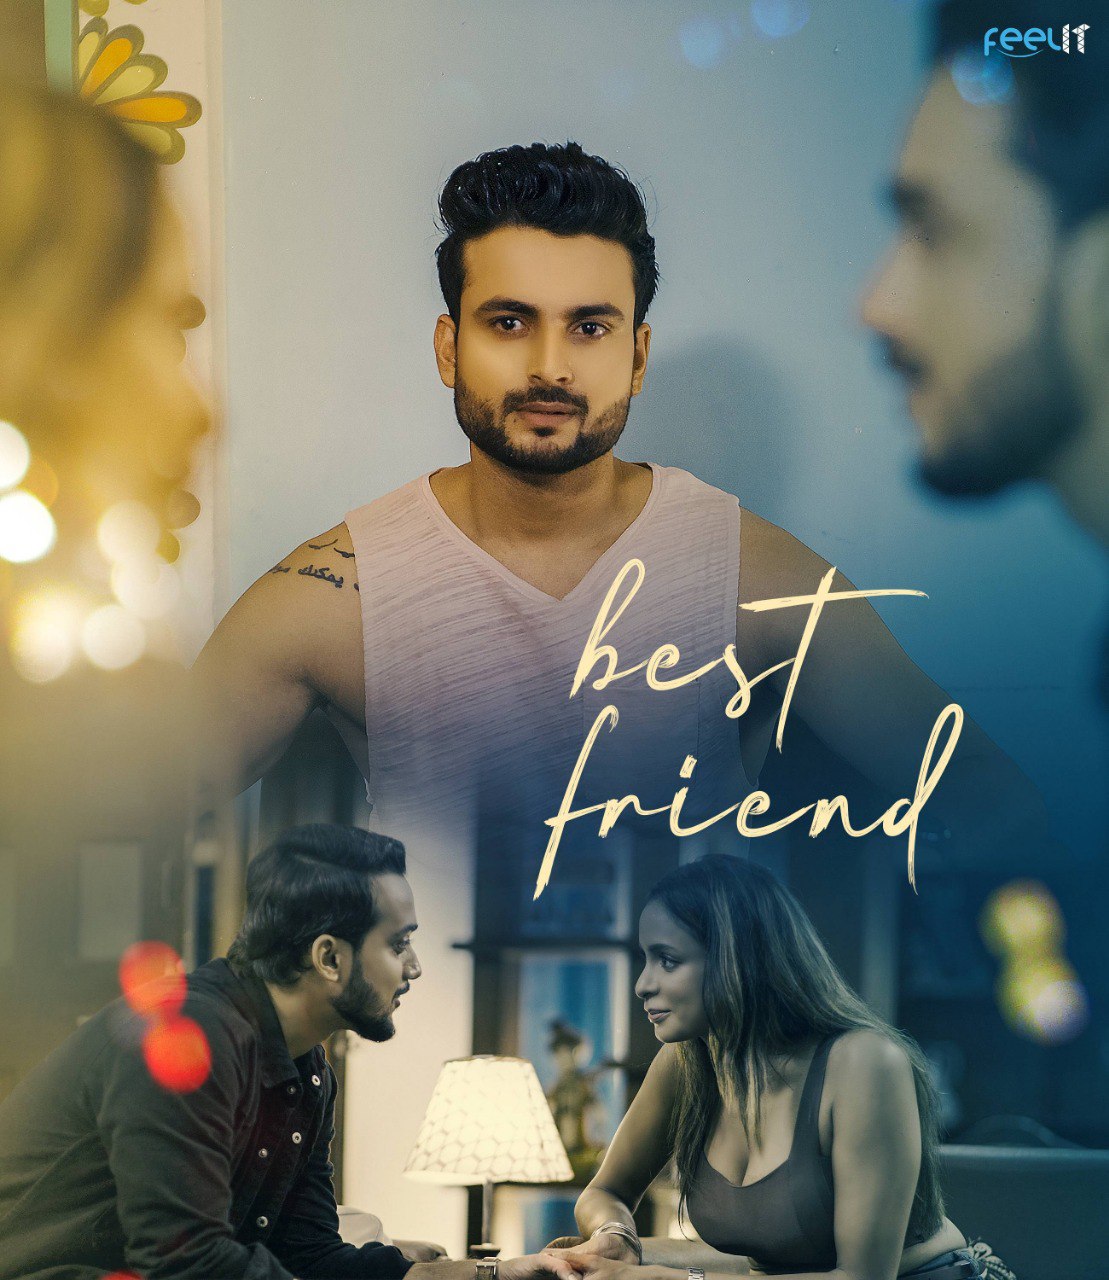 You are currently viewing Best Friend 2022 Feelit Hindi Short Film 720p HDRip 200MB Download & Watch Online